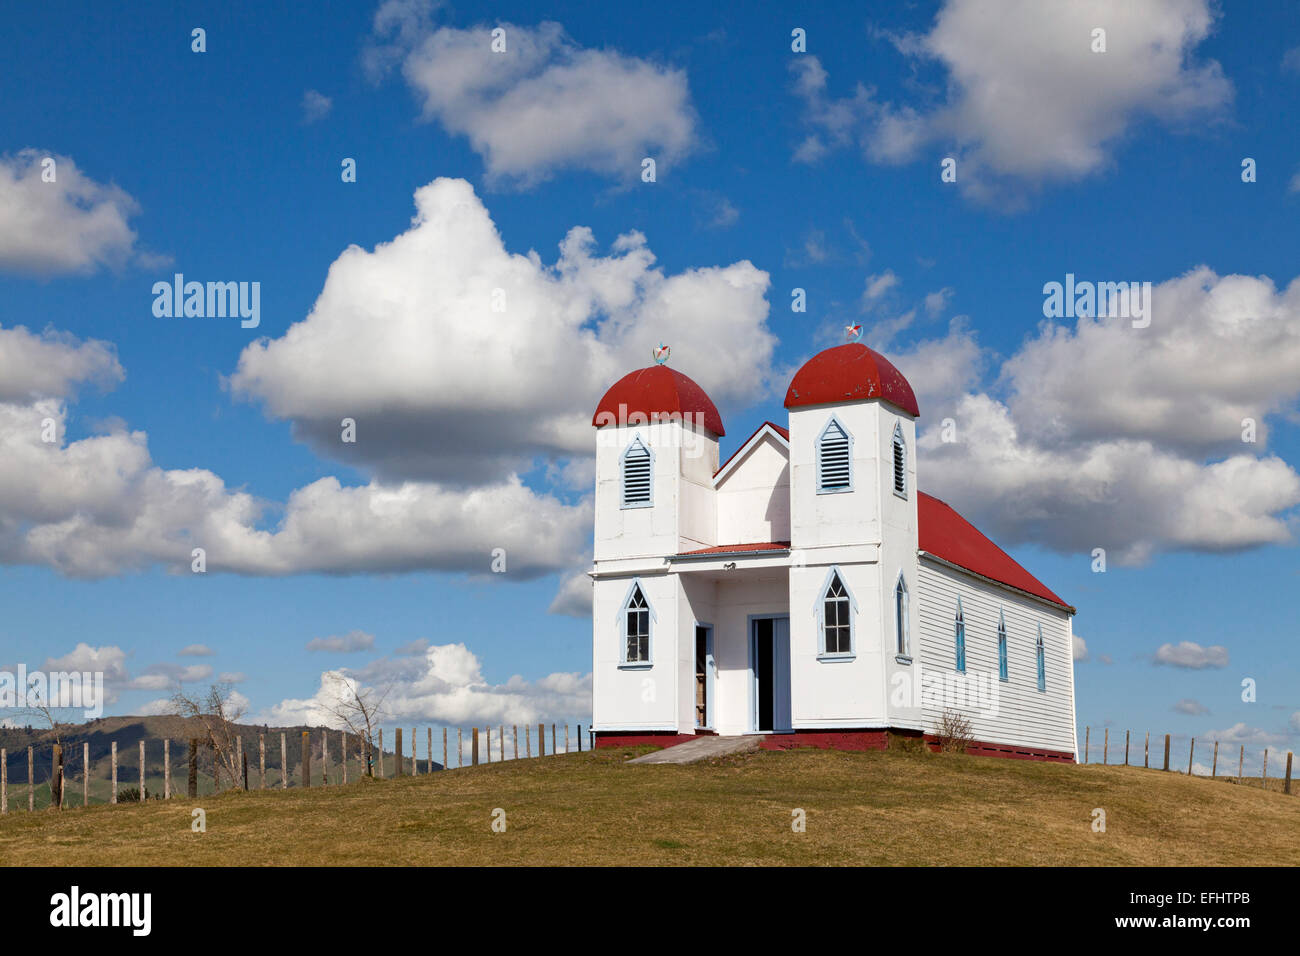 Ratana church on a hill near Raetihi, White church with red roof and twin towers representing Alpha and Omega, Ratana is a Maori Stock Photo